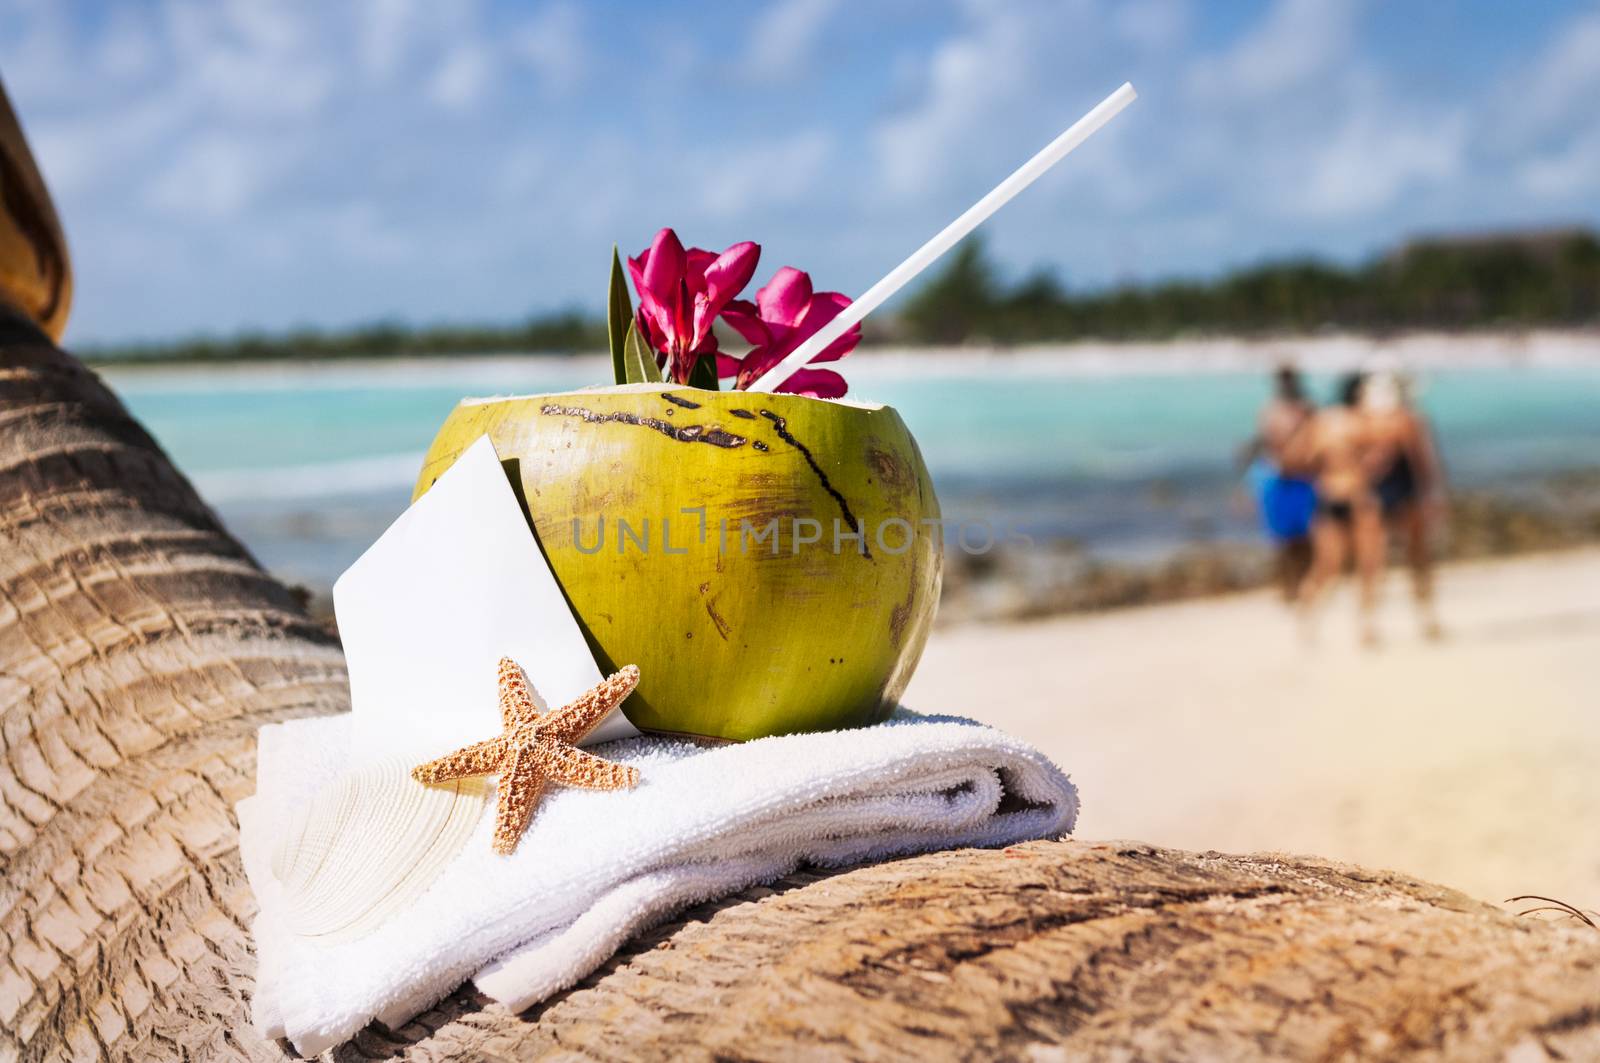 Coconut cocktail starfish tropical Caribbean beach refreshment and towel